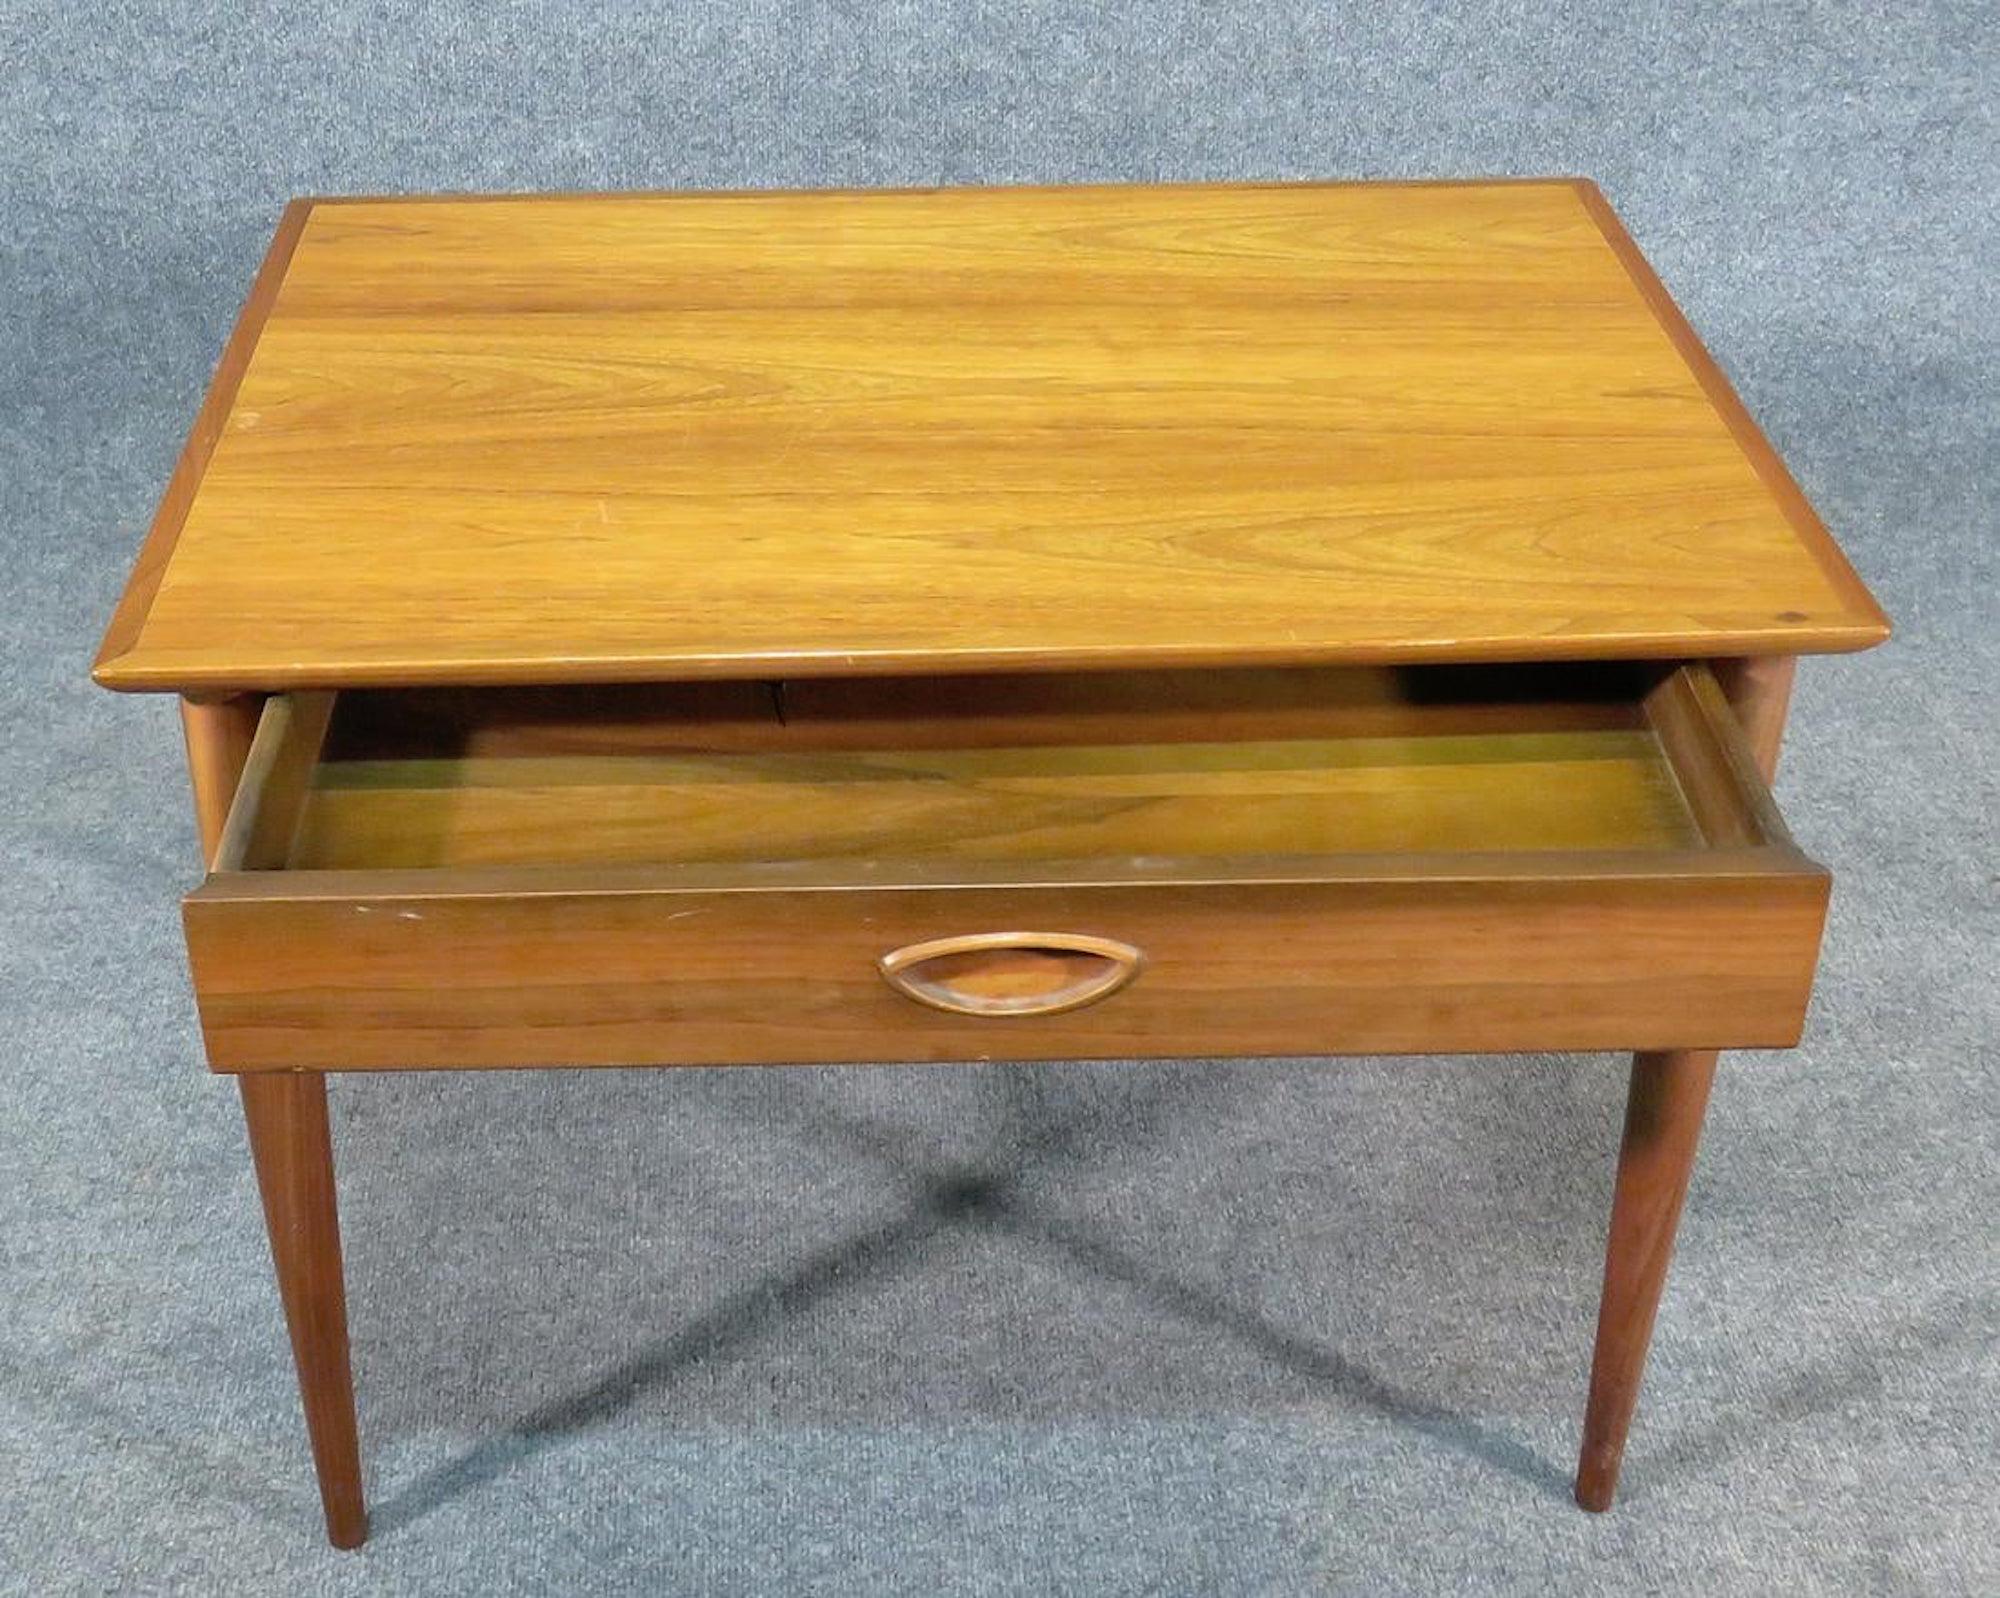 Vintage modern side table in walnut by Heritage with drawer.
(Please confirm item location - NY or NJ - with dealer).
  